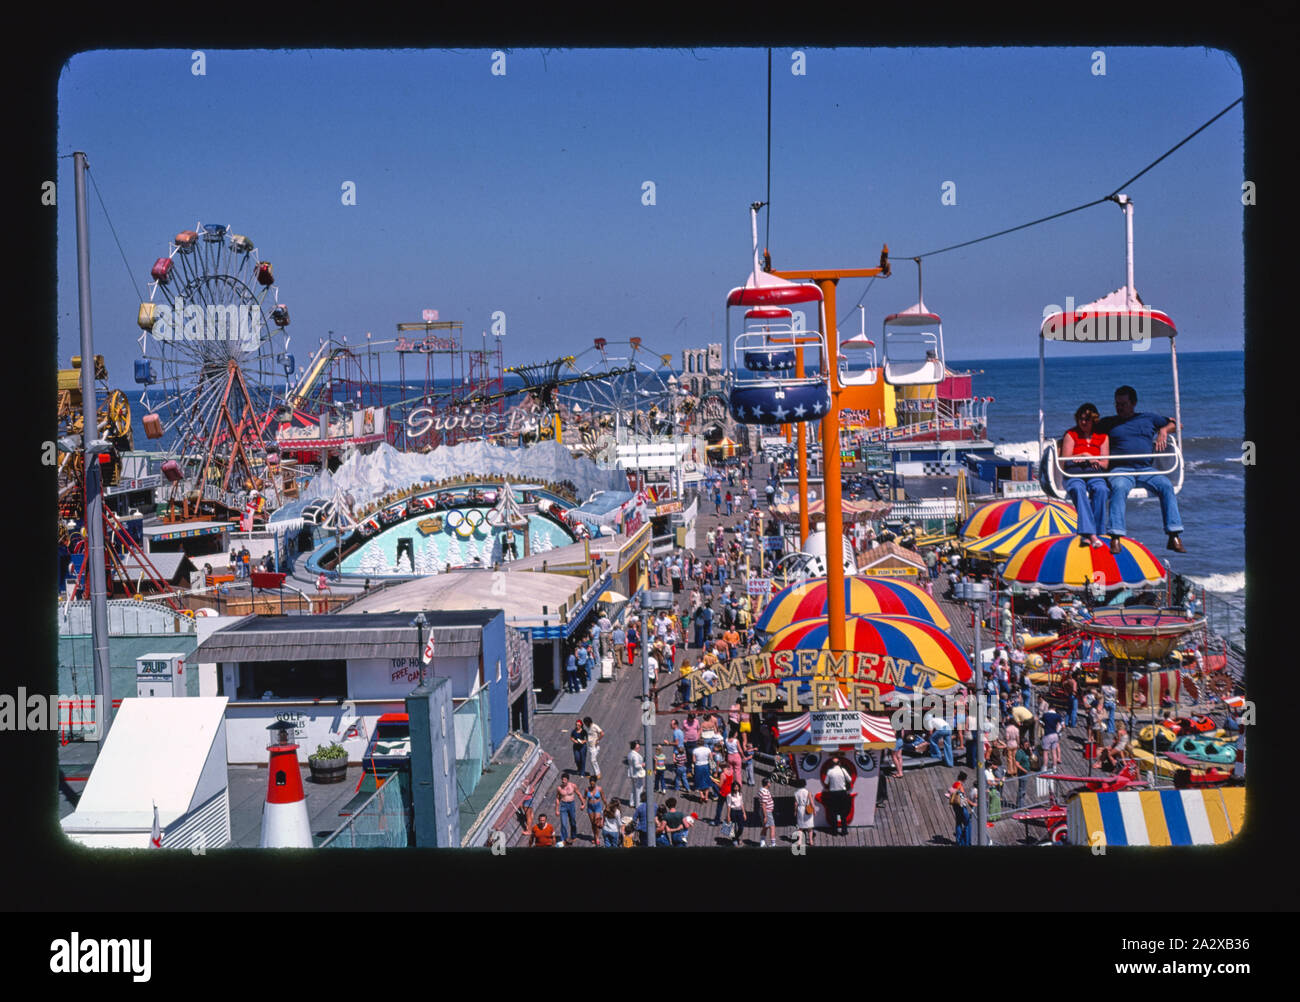 Rides above, Seaside Heights, New Jersey Stock Photo